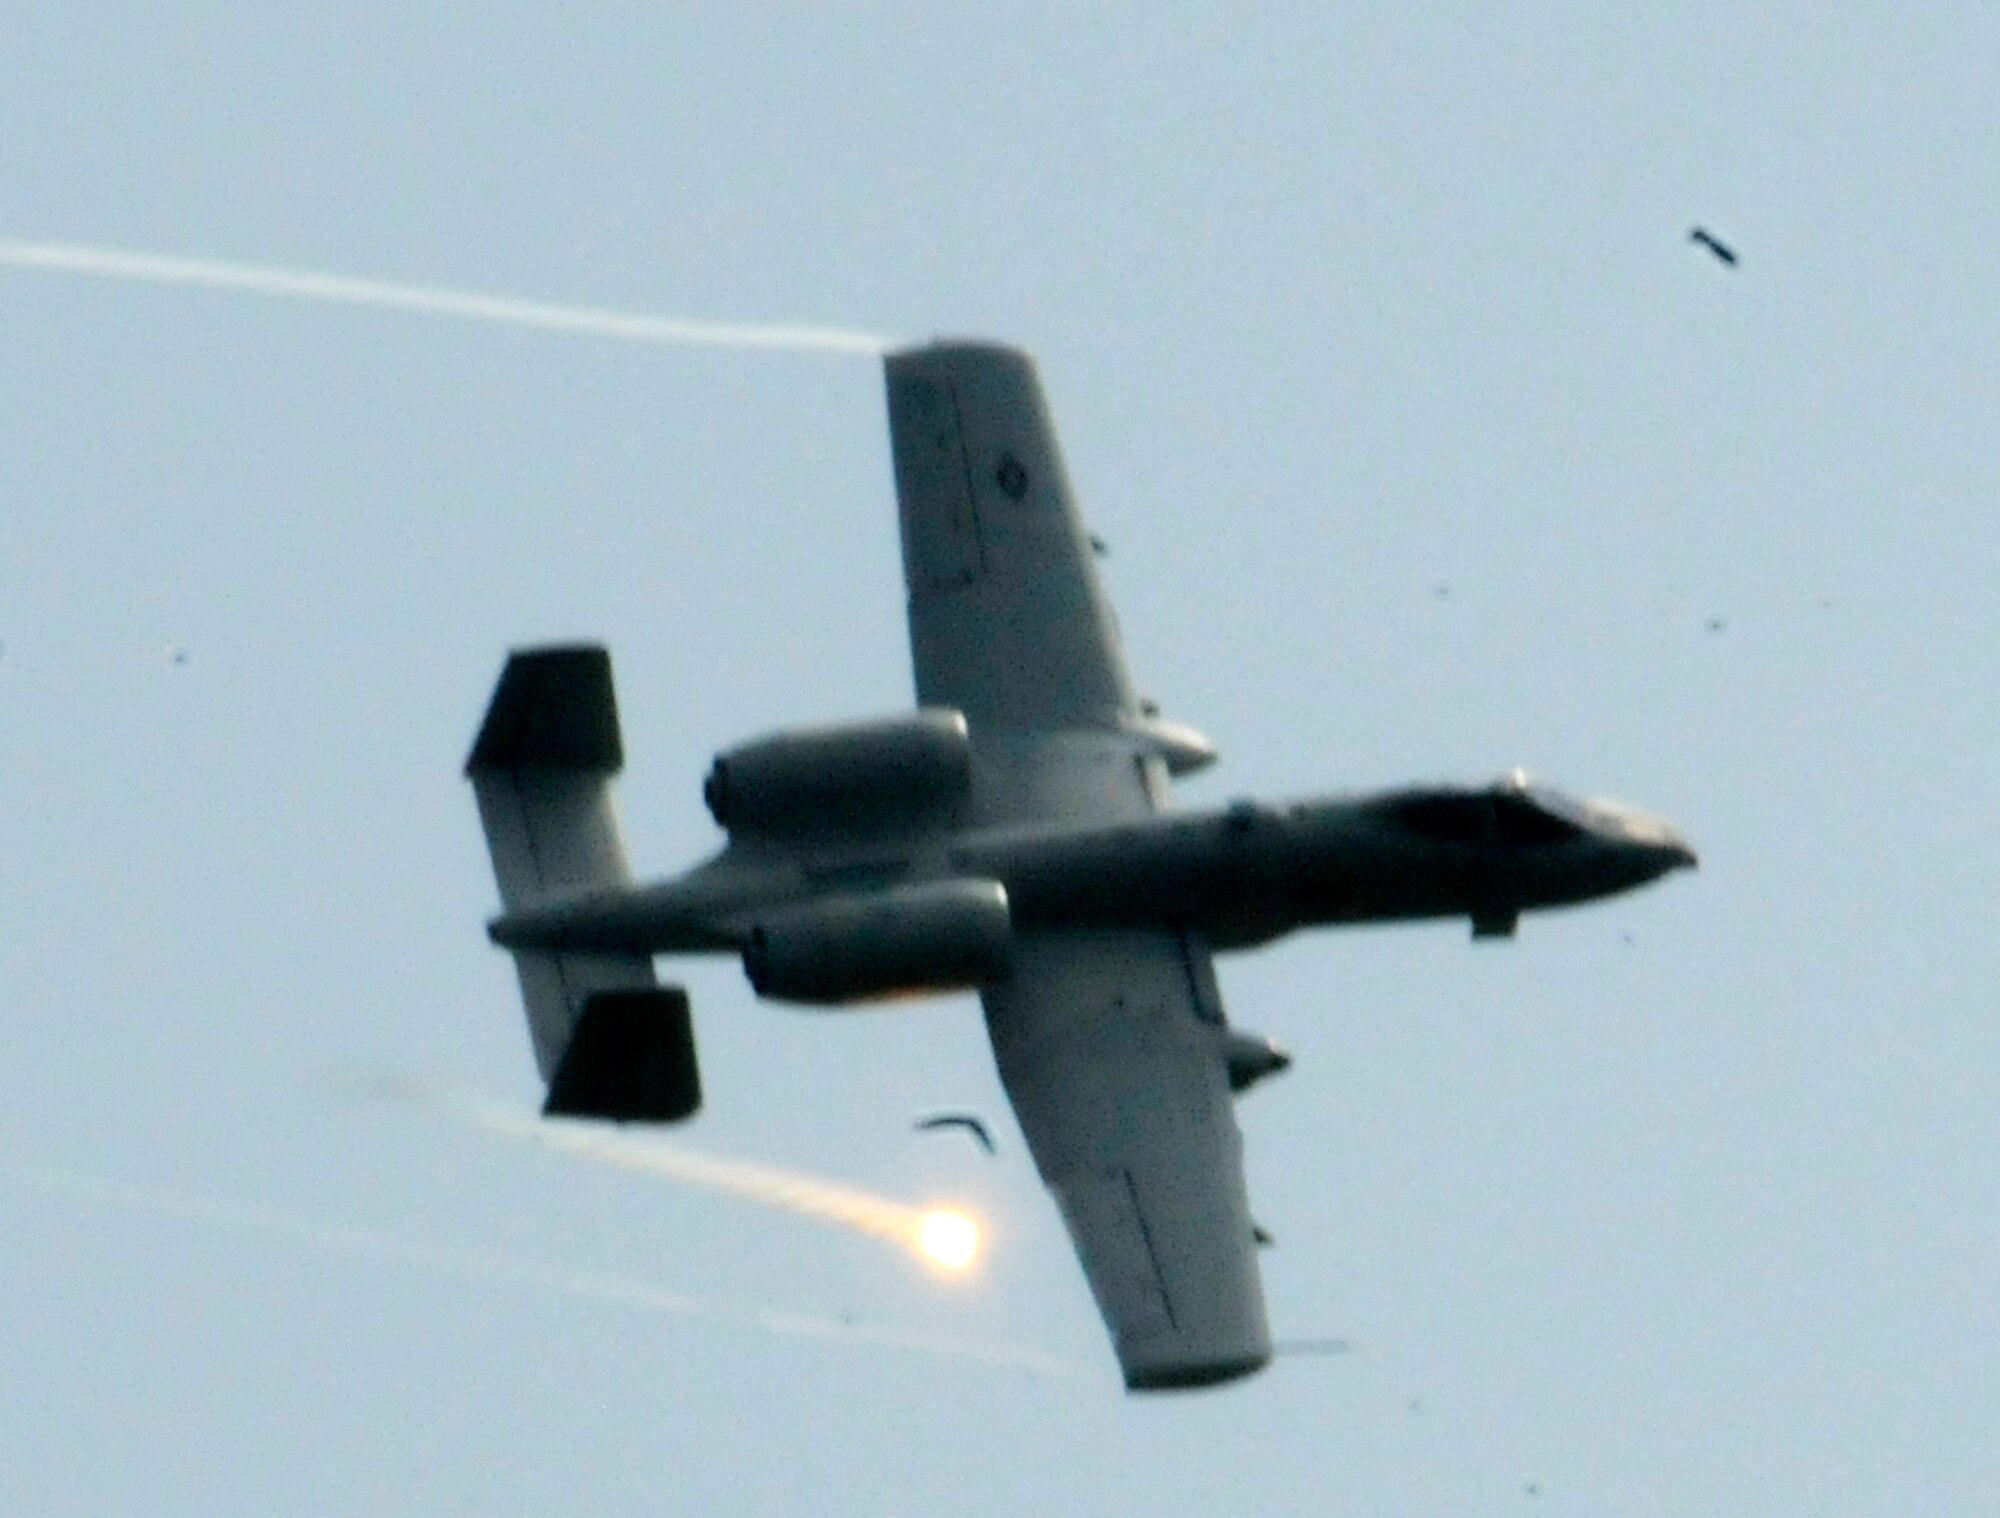 An A-10C Thunderbolt II "Warthog" from the Arkansas National Guard's 188th Fighter Wing conducts an airpower demonstration during an Employer Support of the Guard and Reserve (ESGR) event June 25 at the 188th Fighter Wing Detachment 1 Razorback Range. The 188th hosted 30 employers of Airmen from the Guard unit. (U.S. Air Force photo by Capt. Heath Allen/Arkansas National Guard Public Affairs)